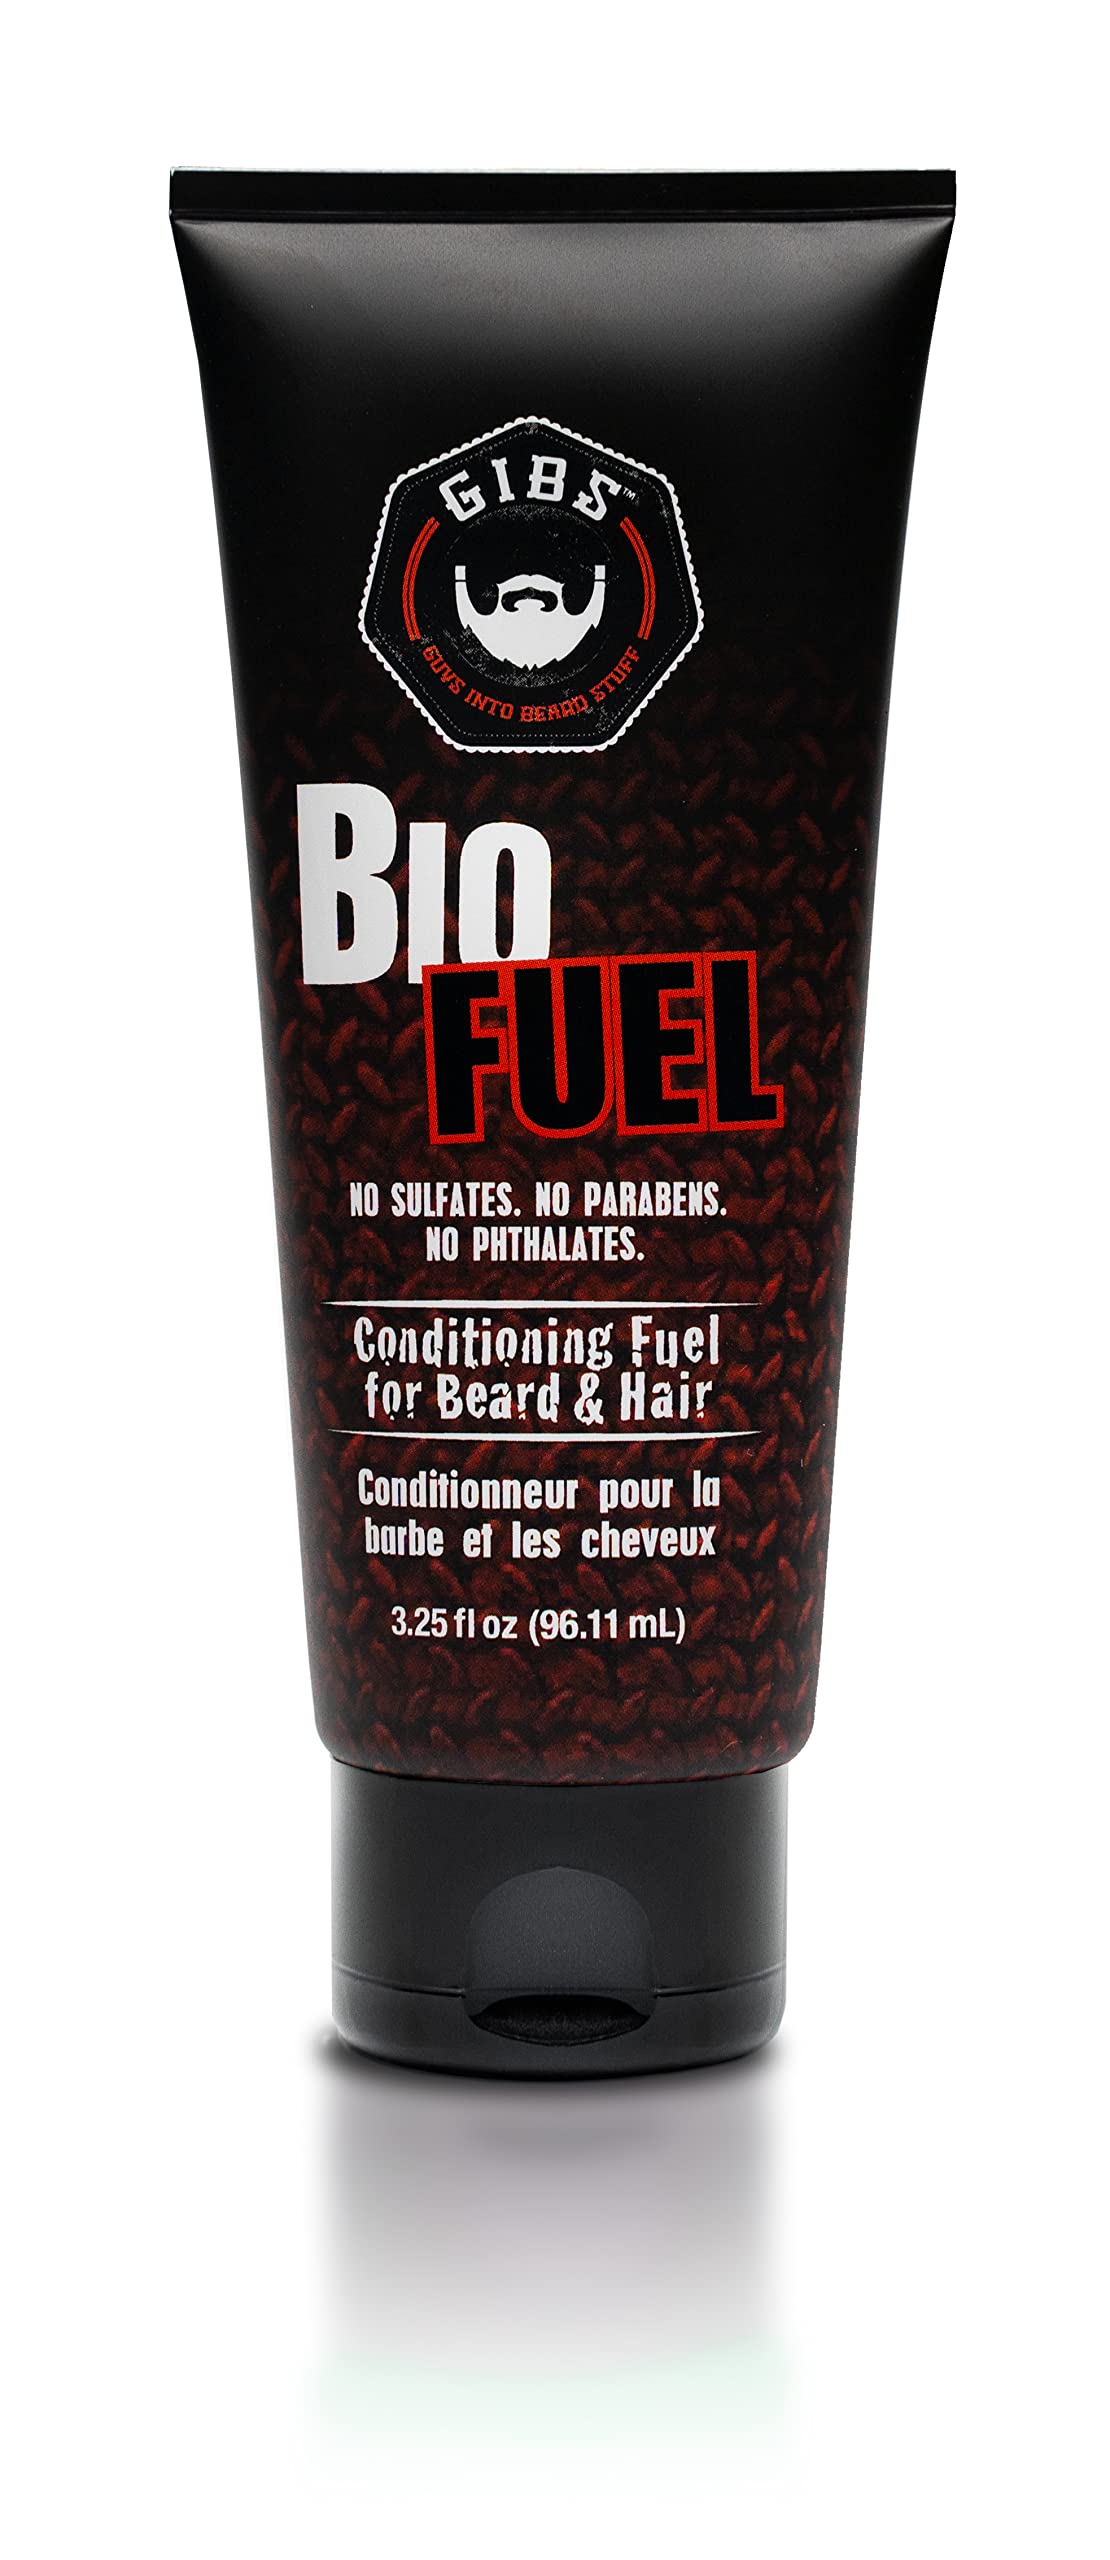 GIBS BioFuel Hair Conditioner For Men - Beard & Hair Conditioner, 3.25 oz